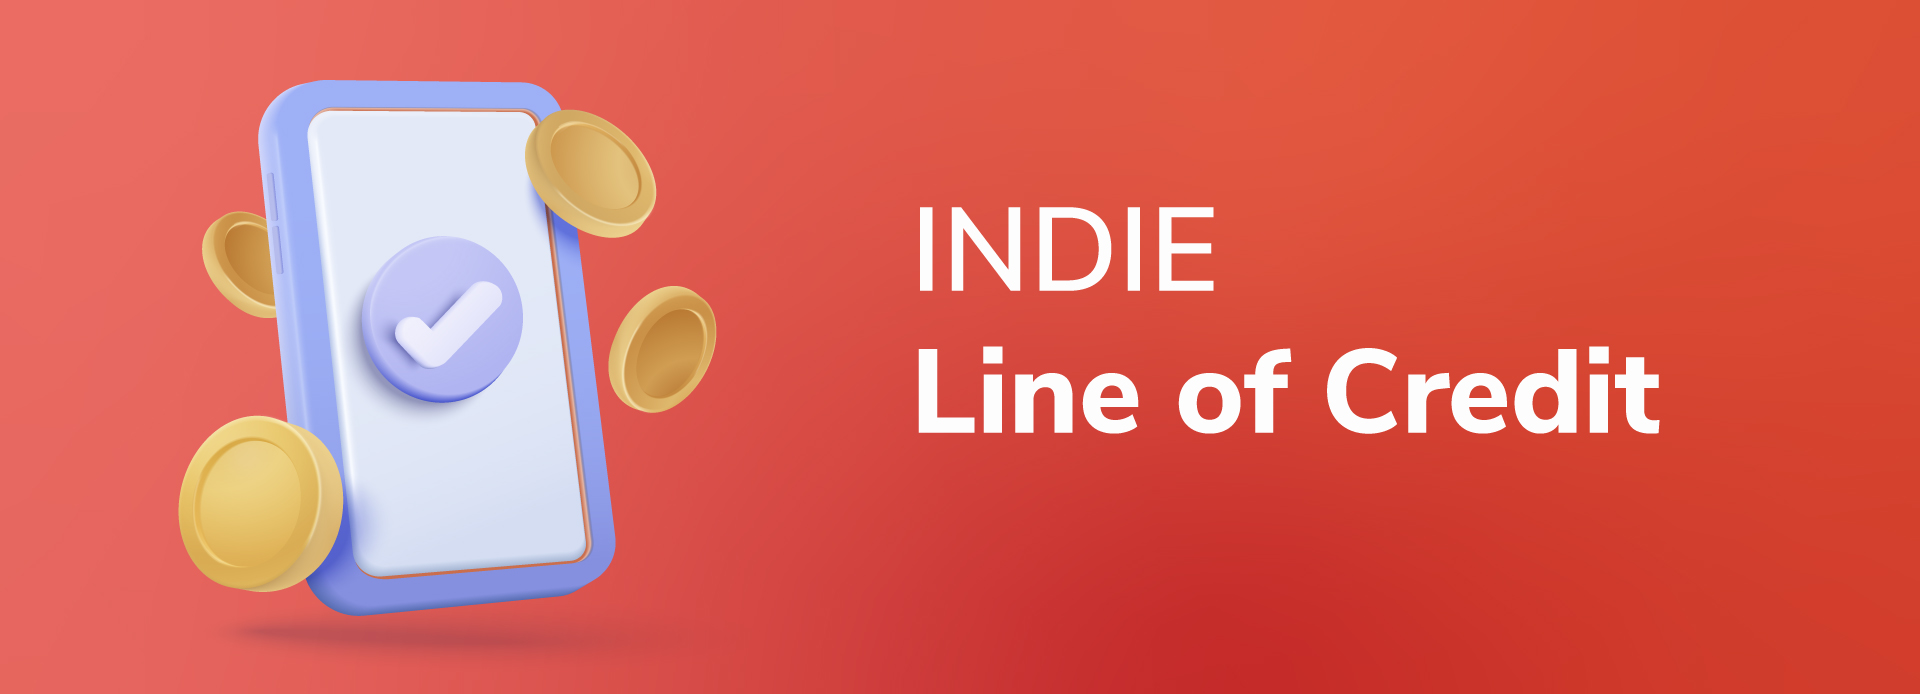 INDIE's line of credit: A convenient solution for your financial needs